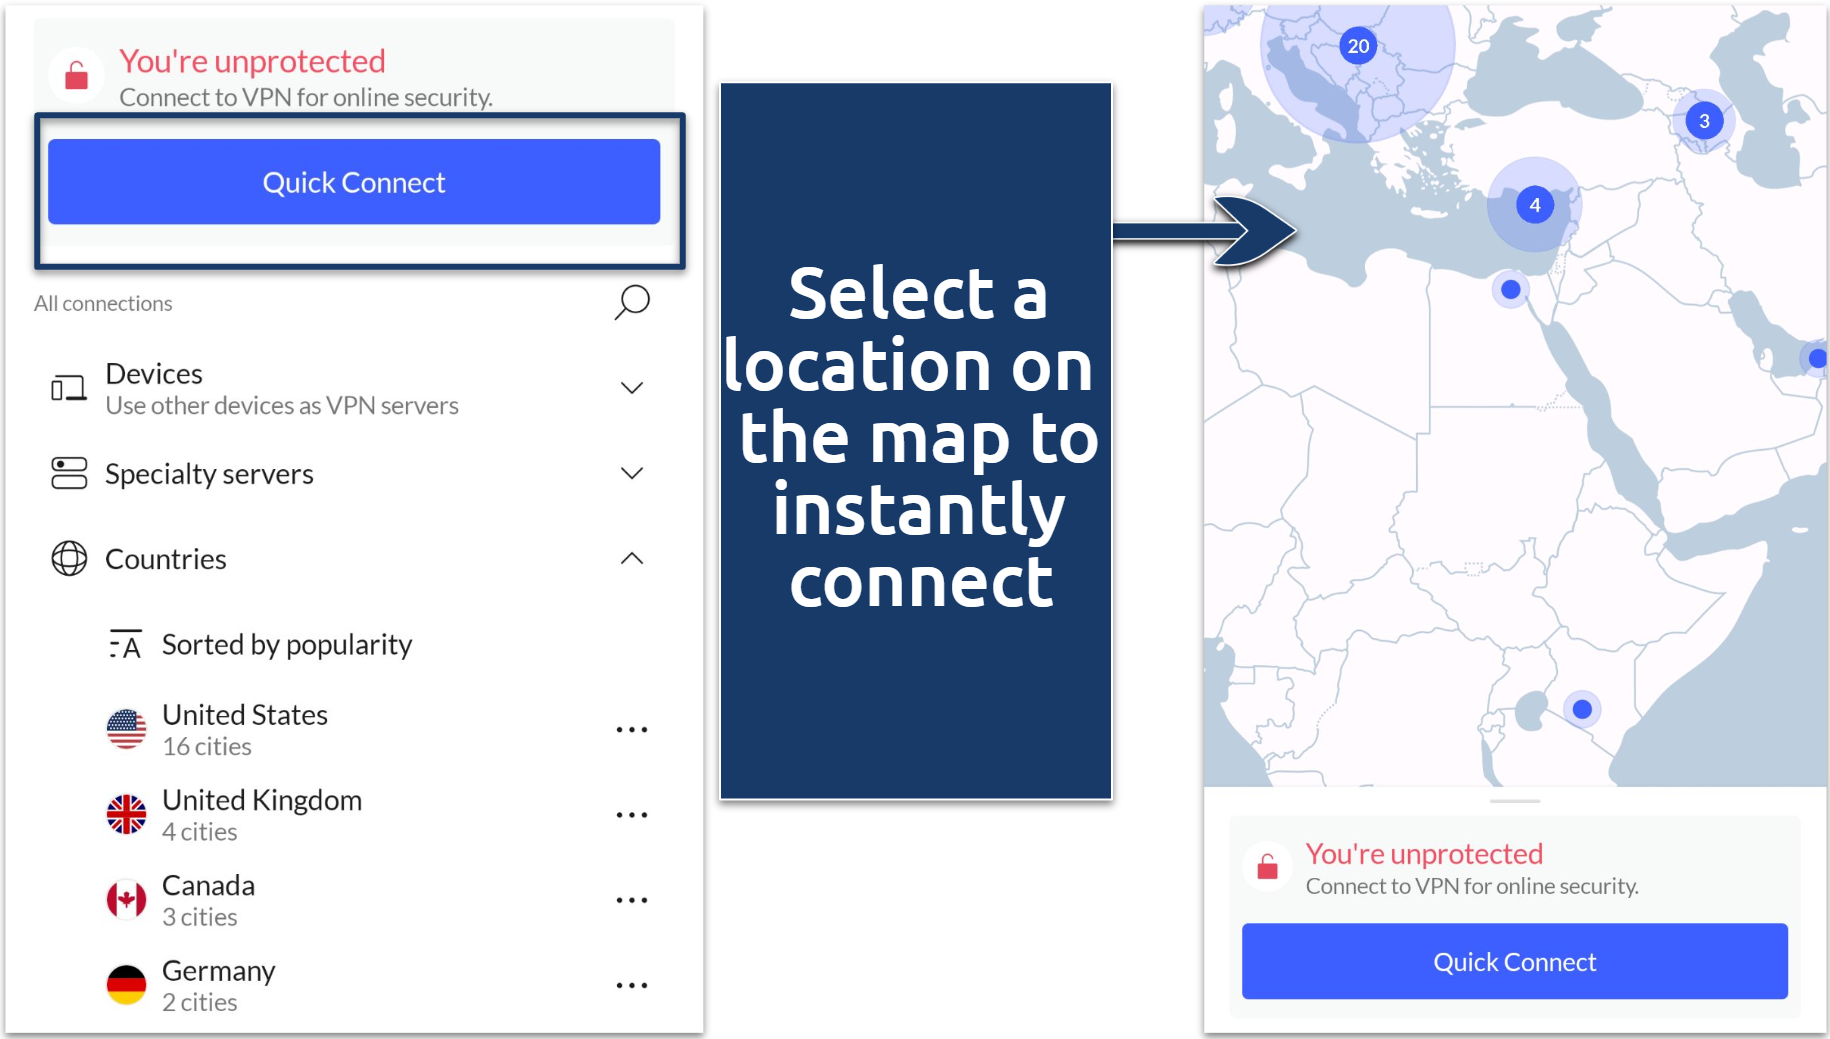 Screenshots of the NordVPN app showing the phone interface